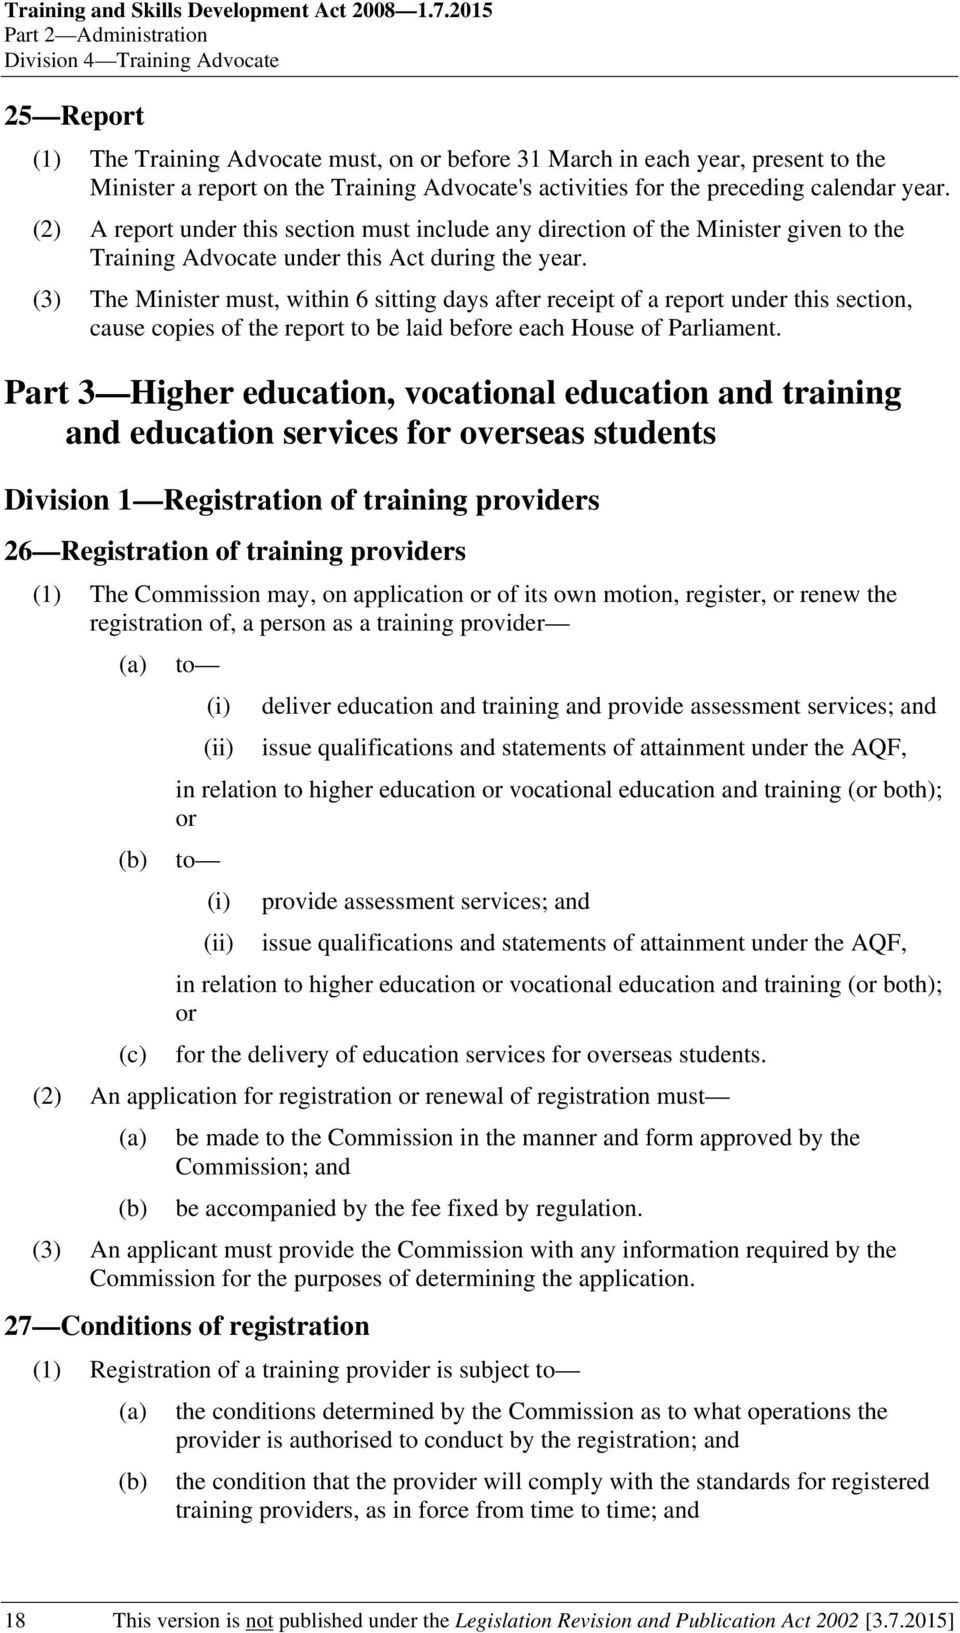 activities for the preceding calendar year. (2) A report under this section must include any direction of the Minister given to the Training Advocate under this Act during the year.